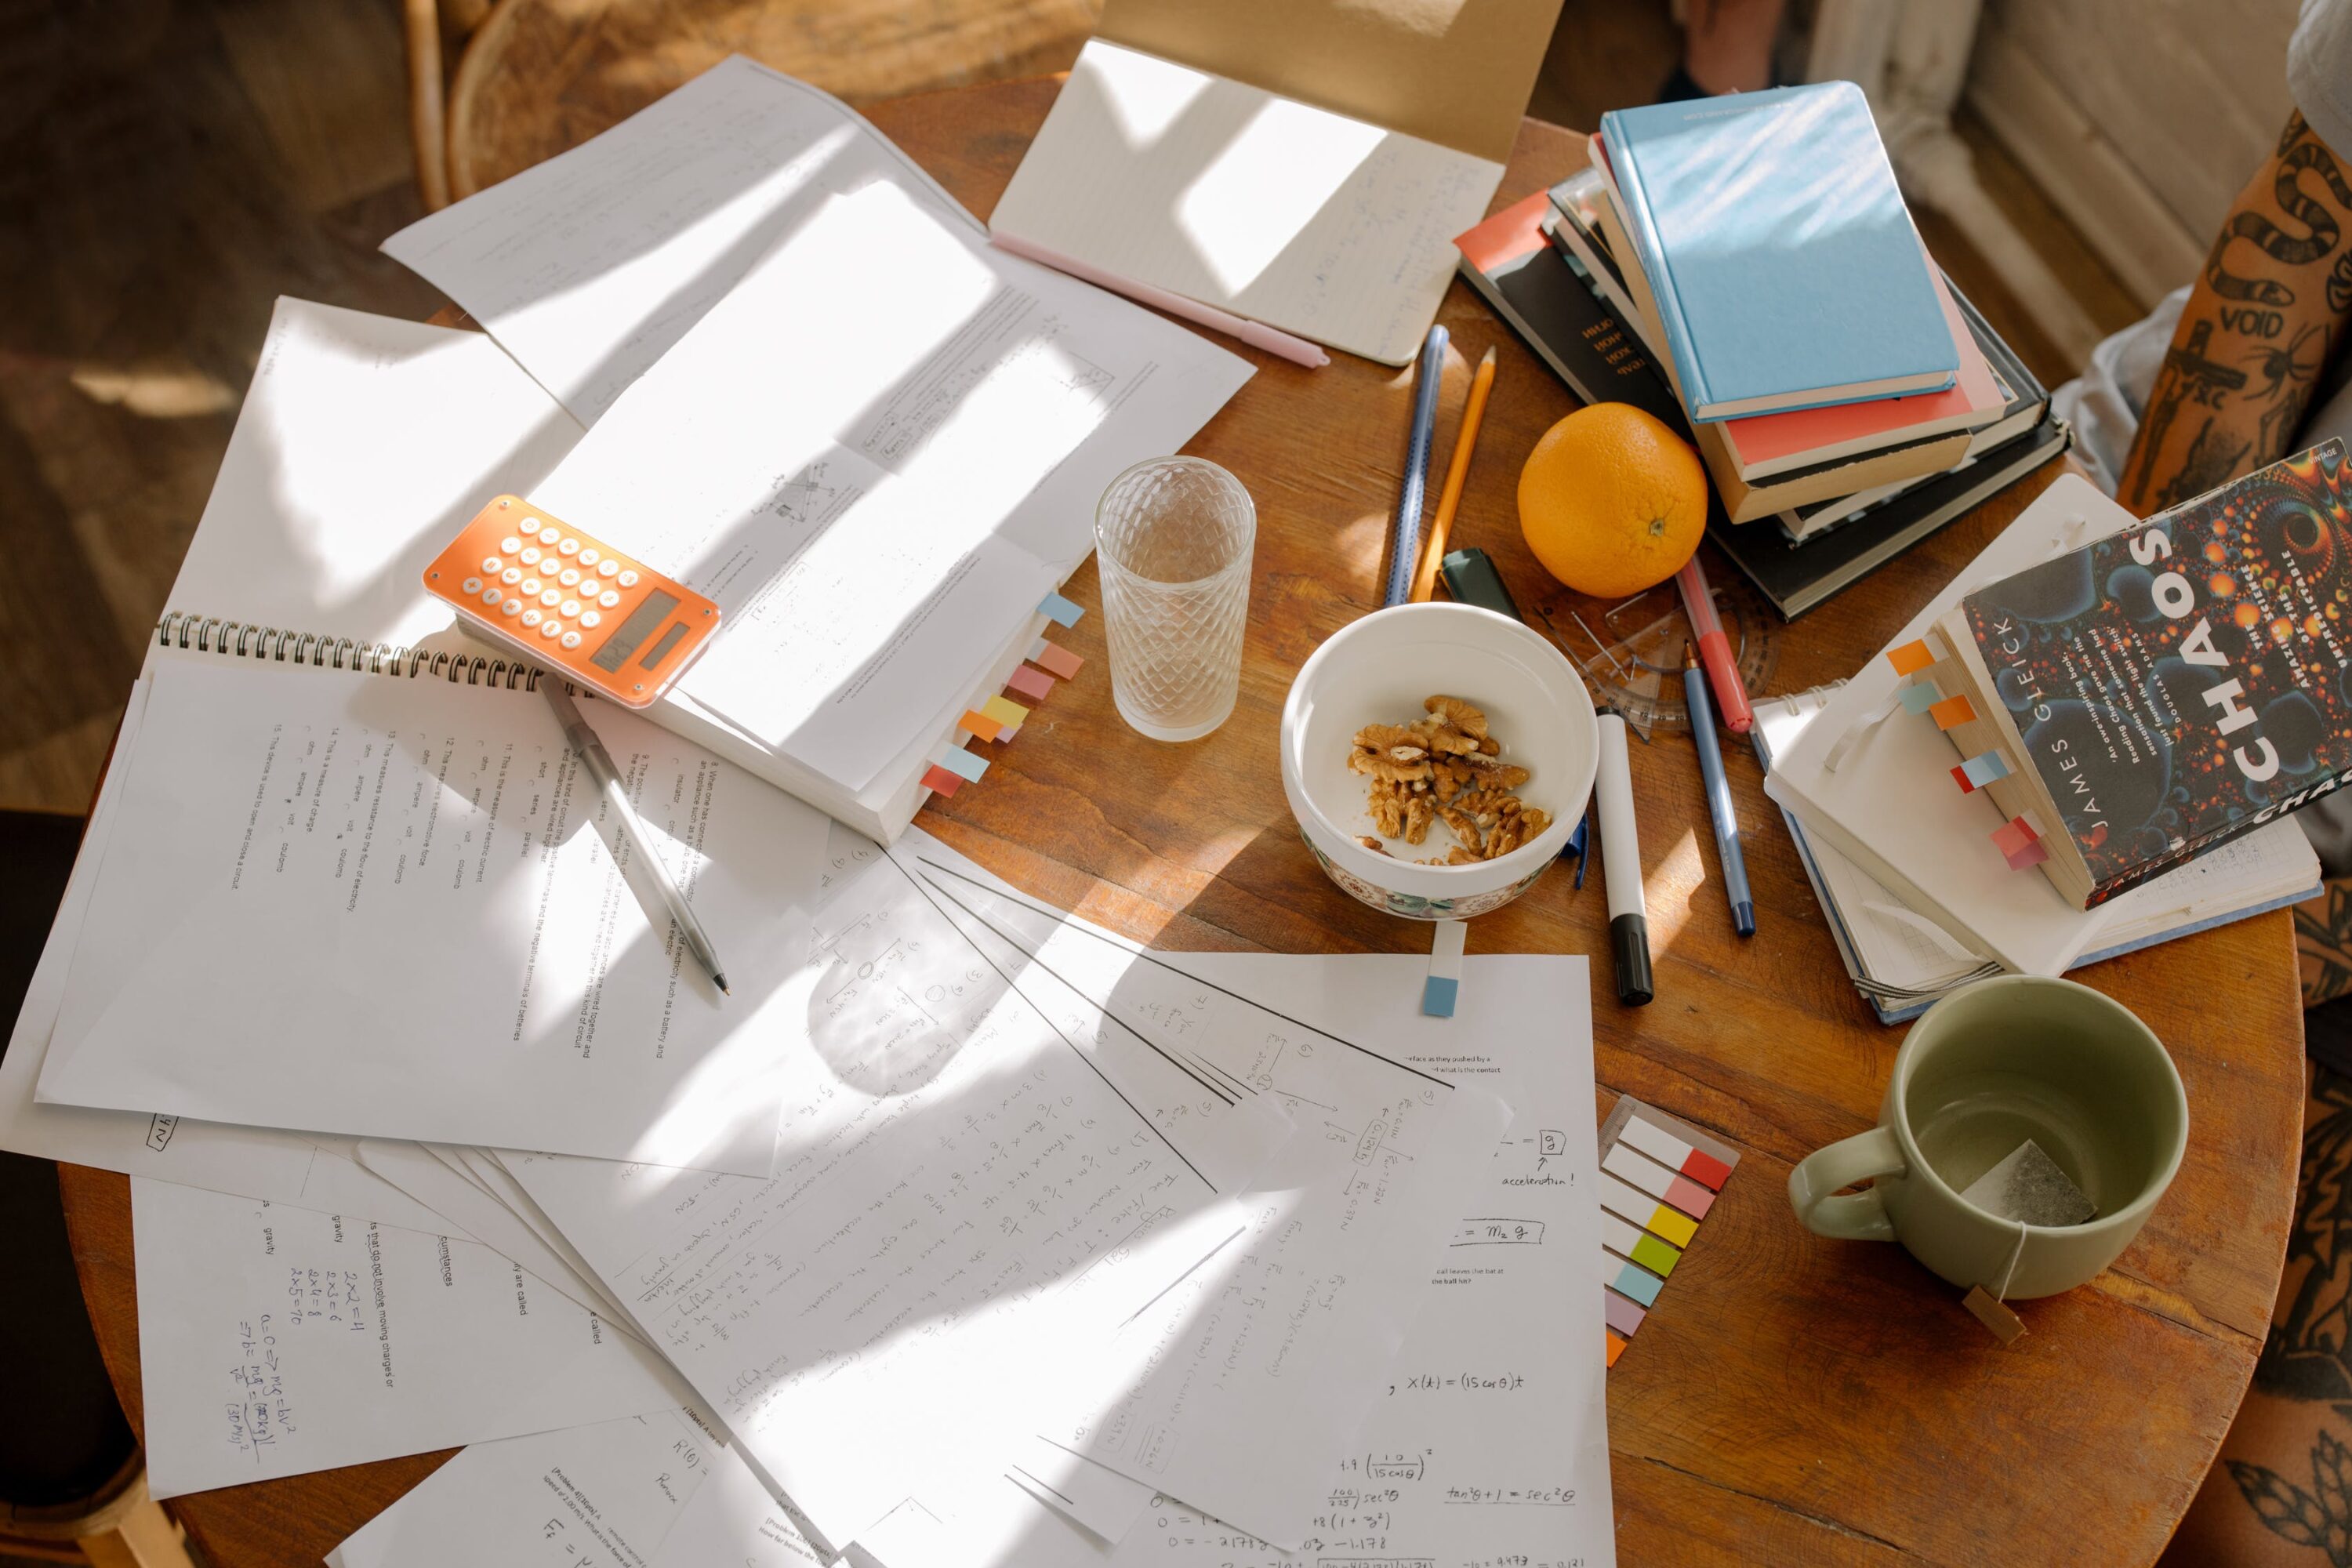 table cluttered with papers